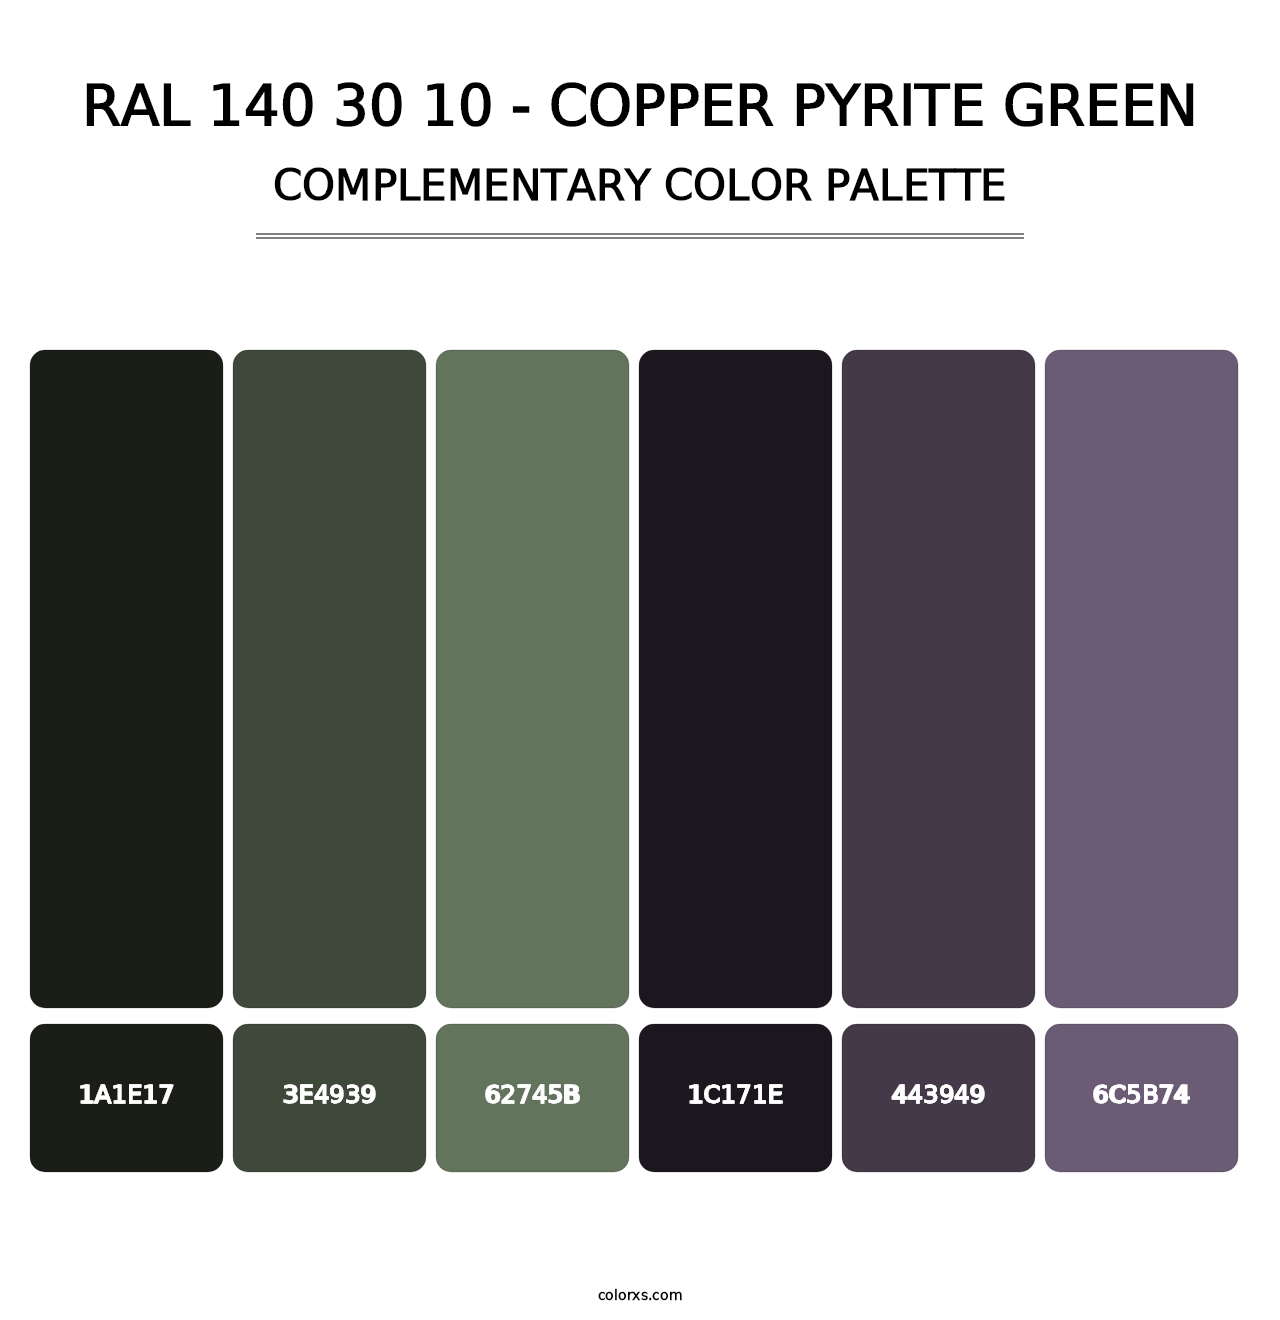 RAL 140 30 10 - Copper Pyrite Green - Complementary Color Palette